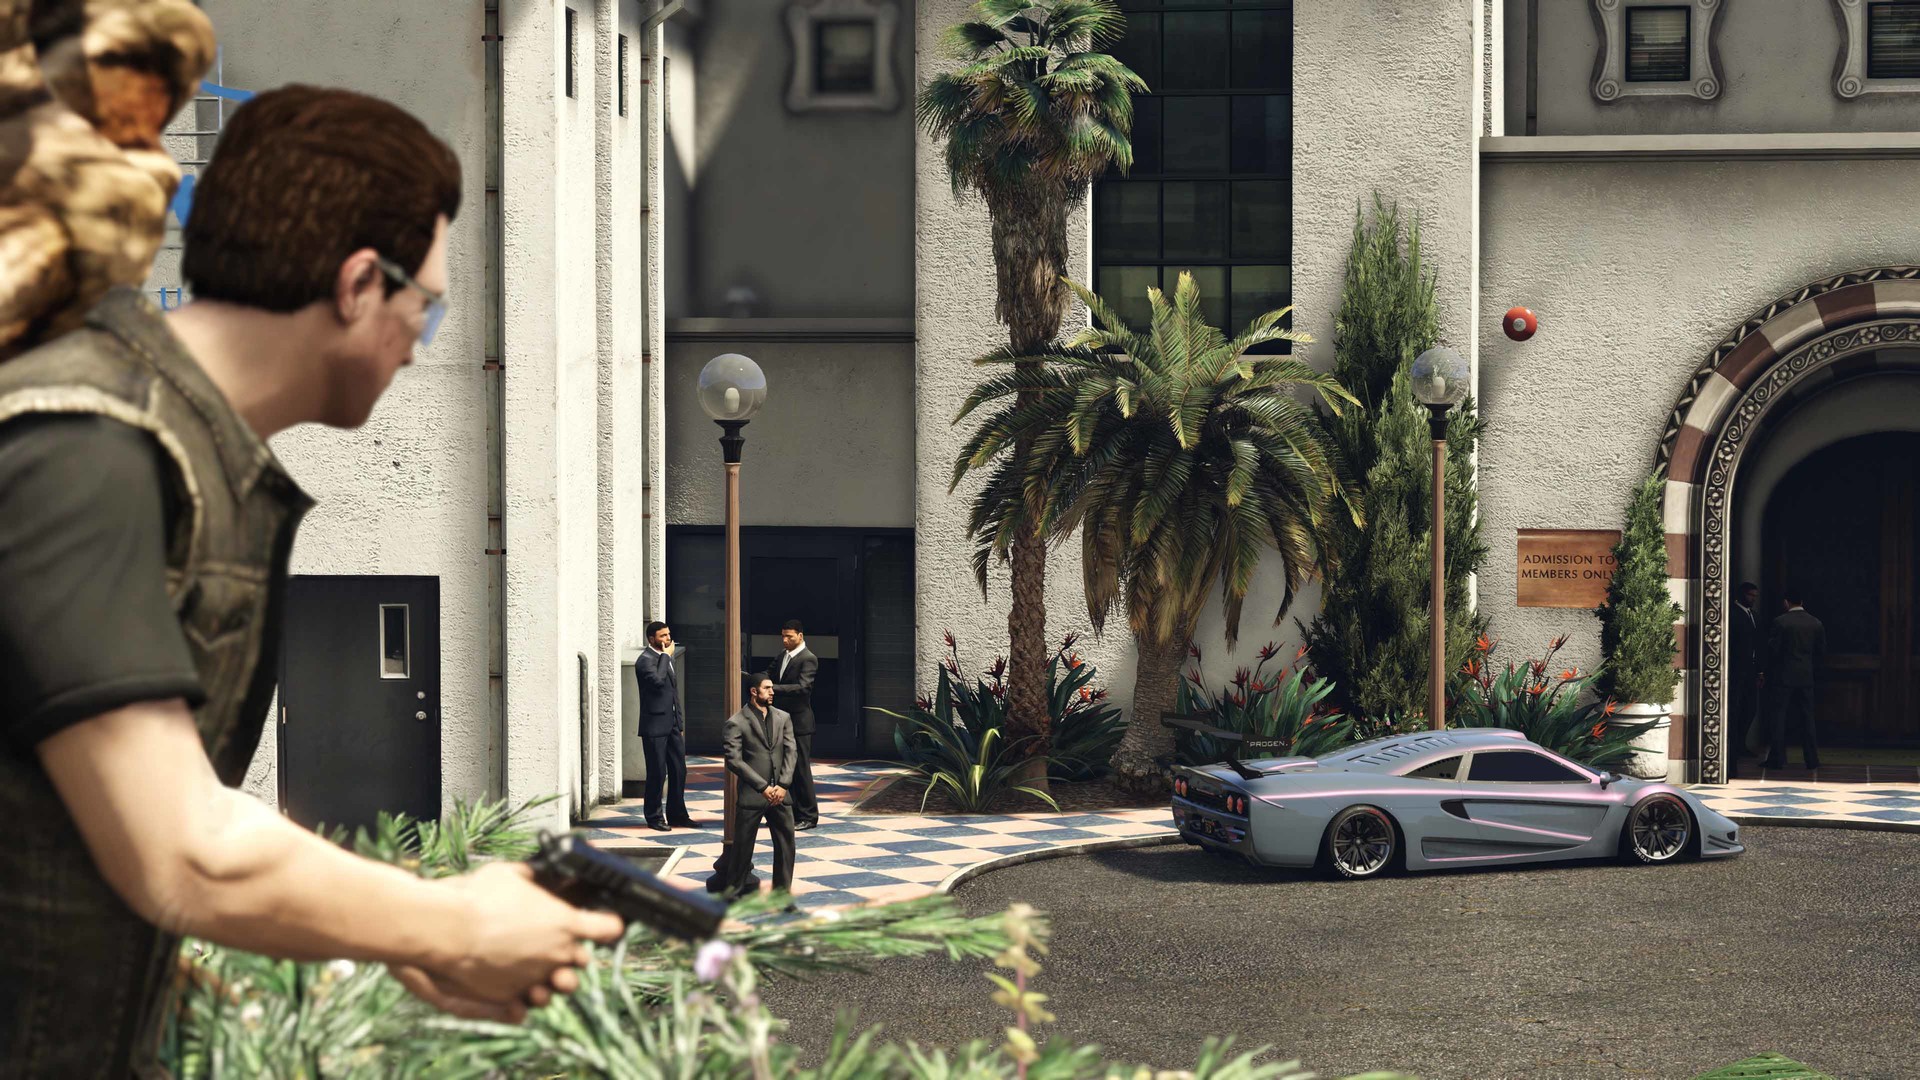 GTA 5 Is Epic Games Store's New Free Game